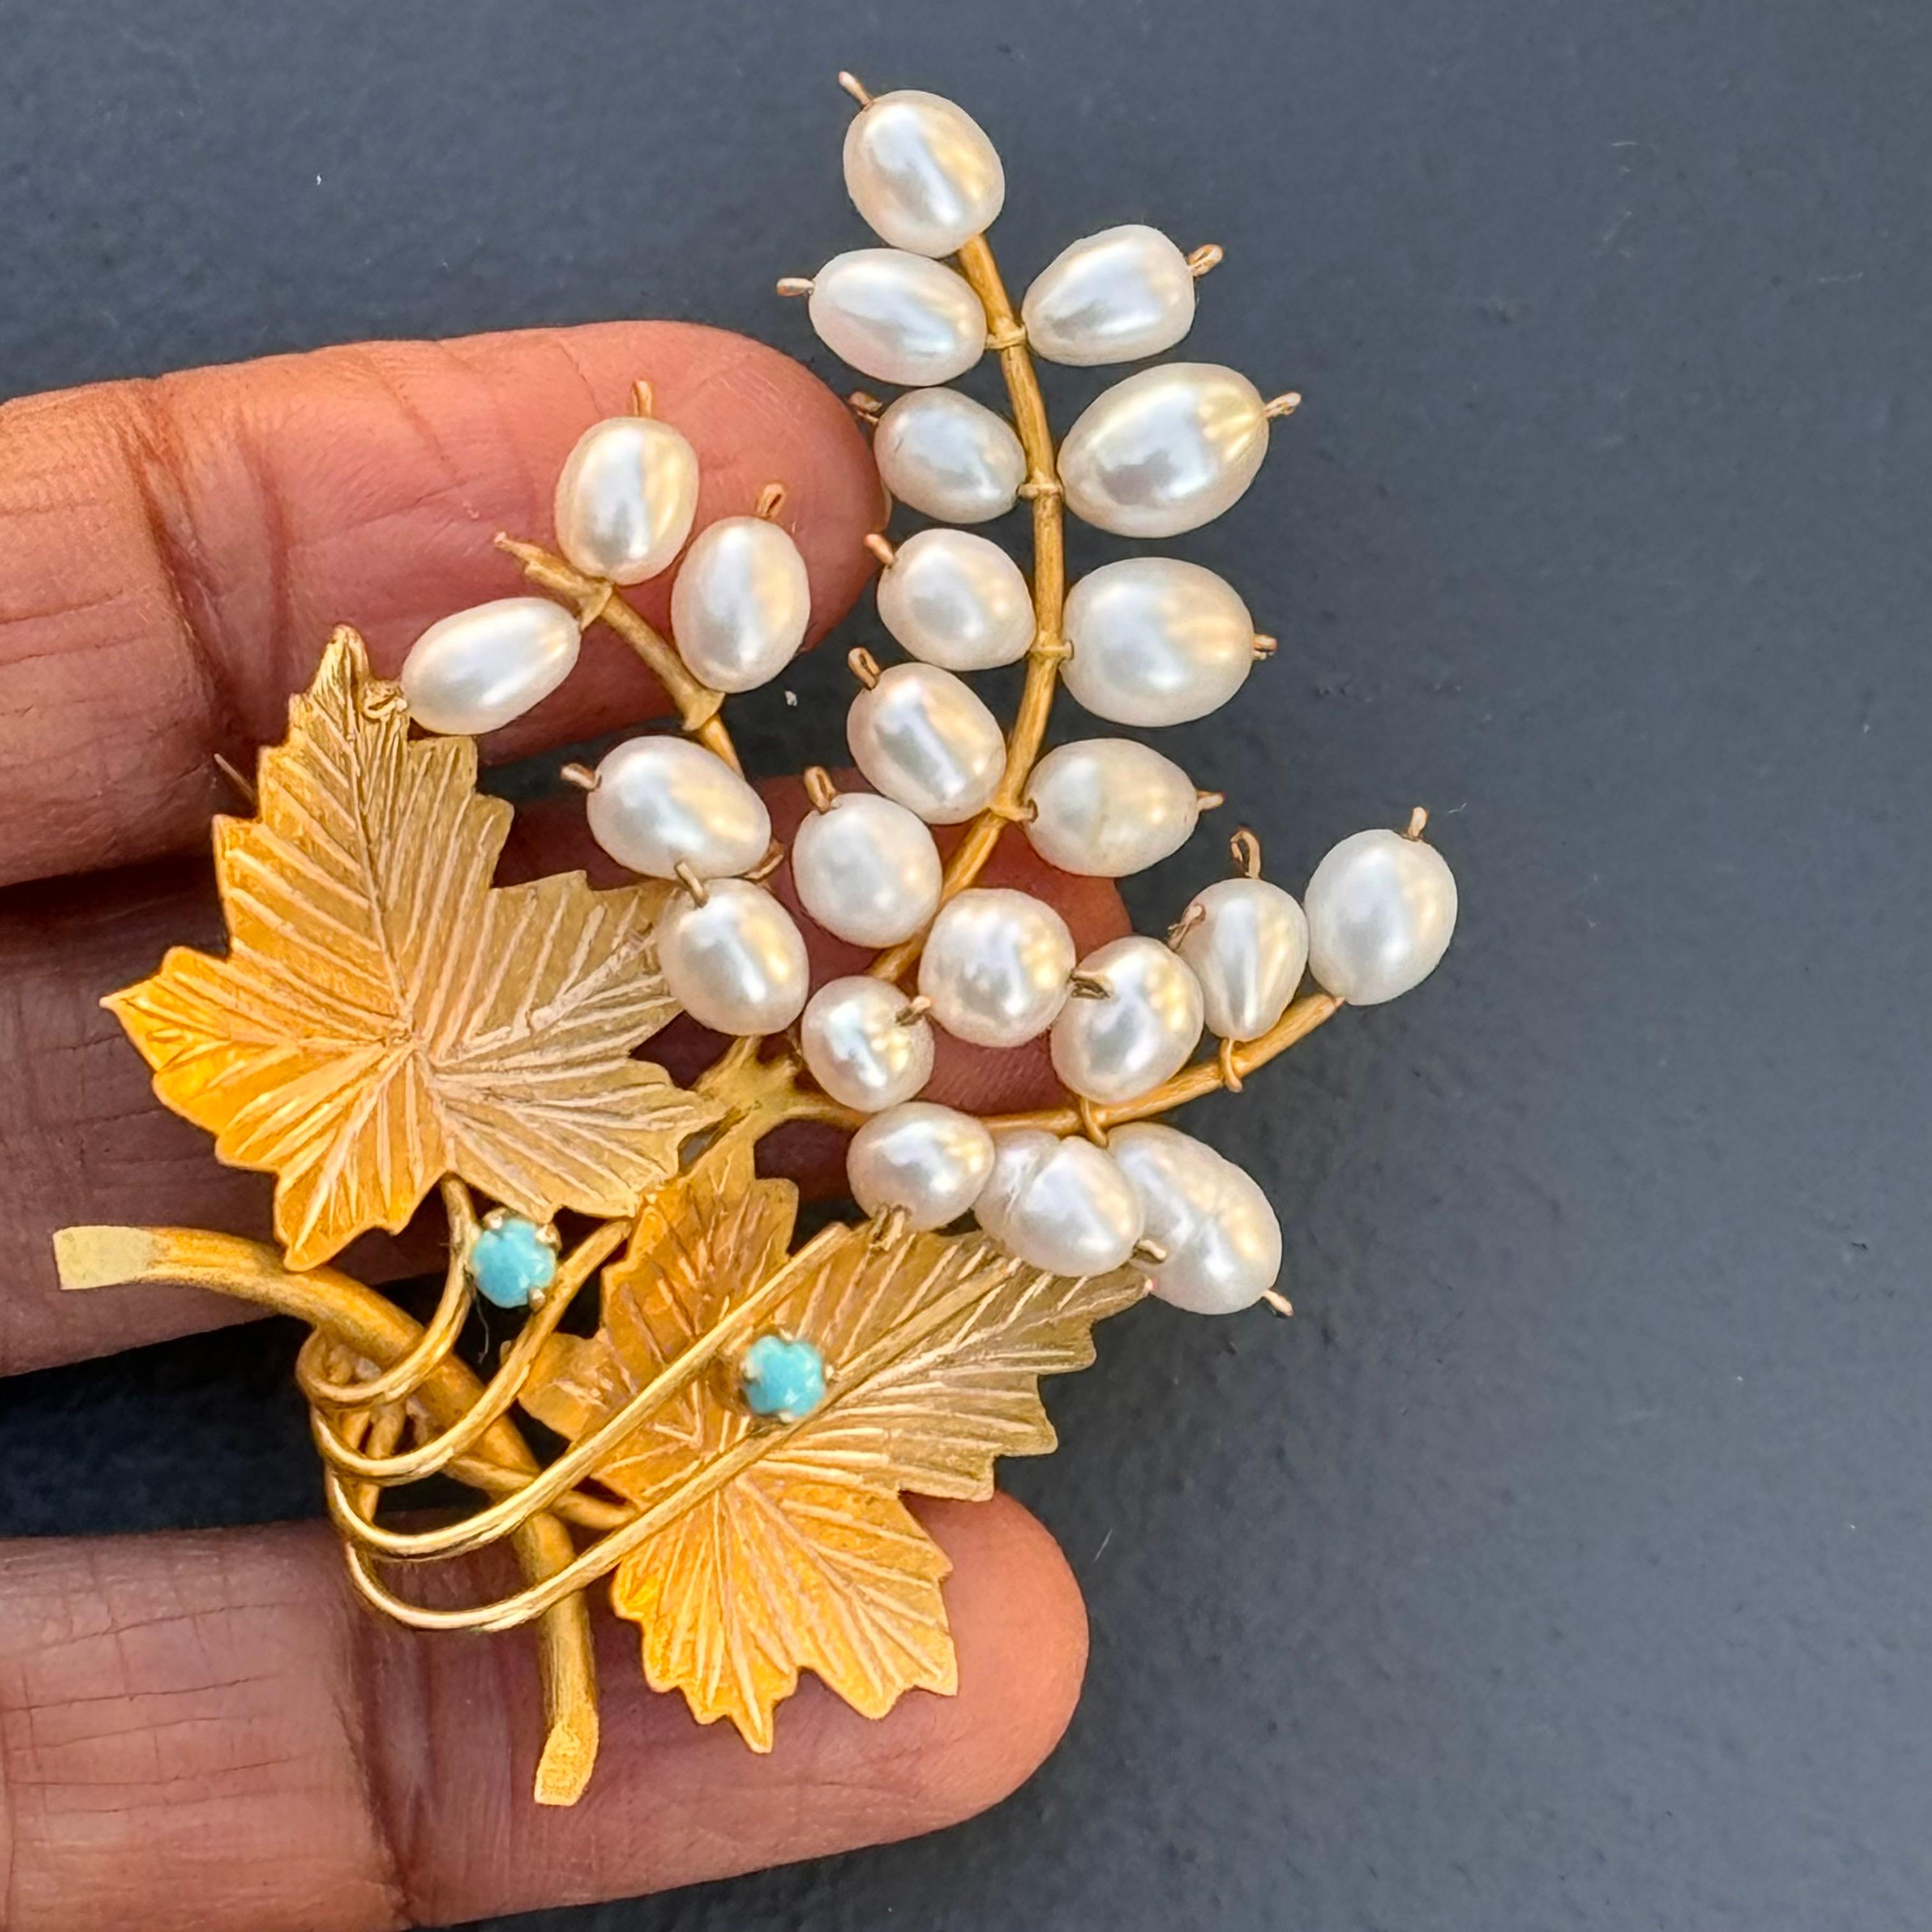  750 18K solid Yellow Gold Cultured Pearl Cluster  Brooch Pin In Good Condition For Sale In Plainsboro, NJ